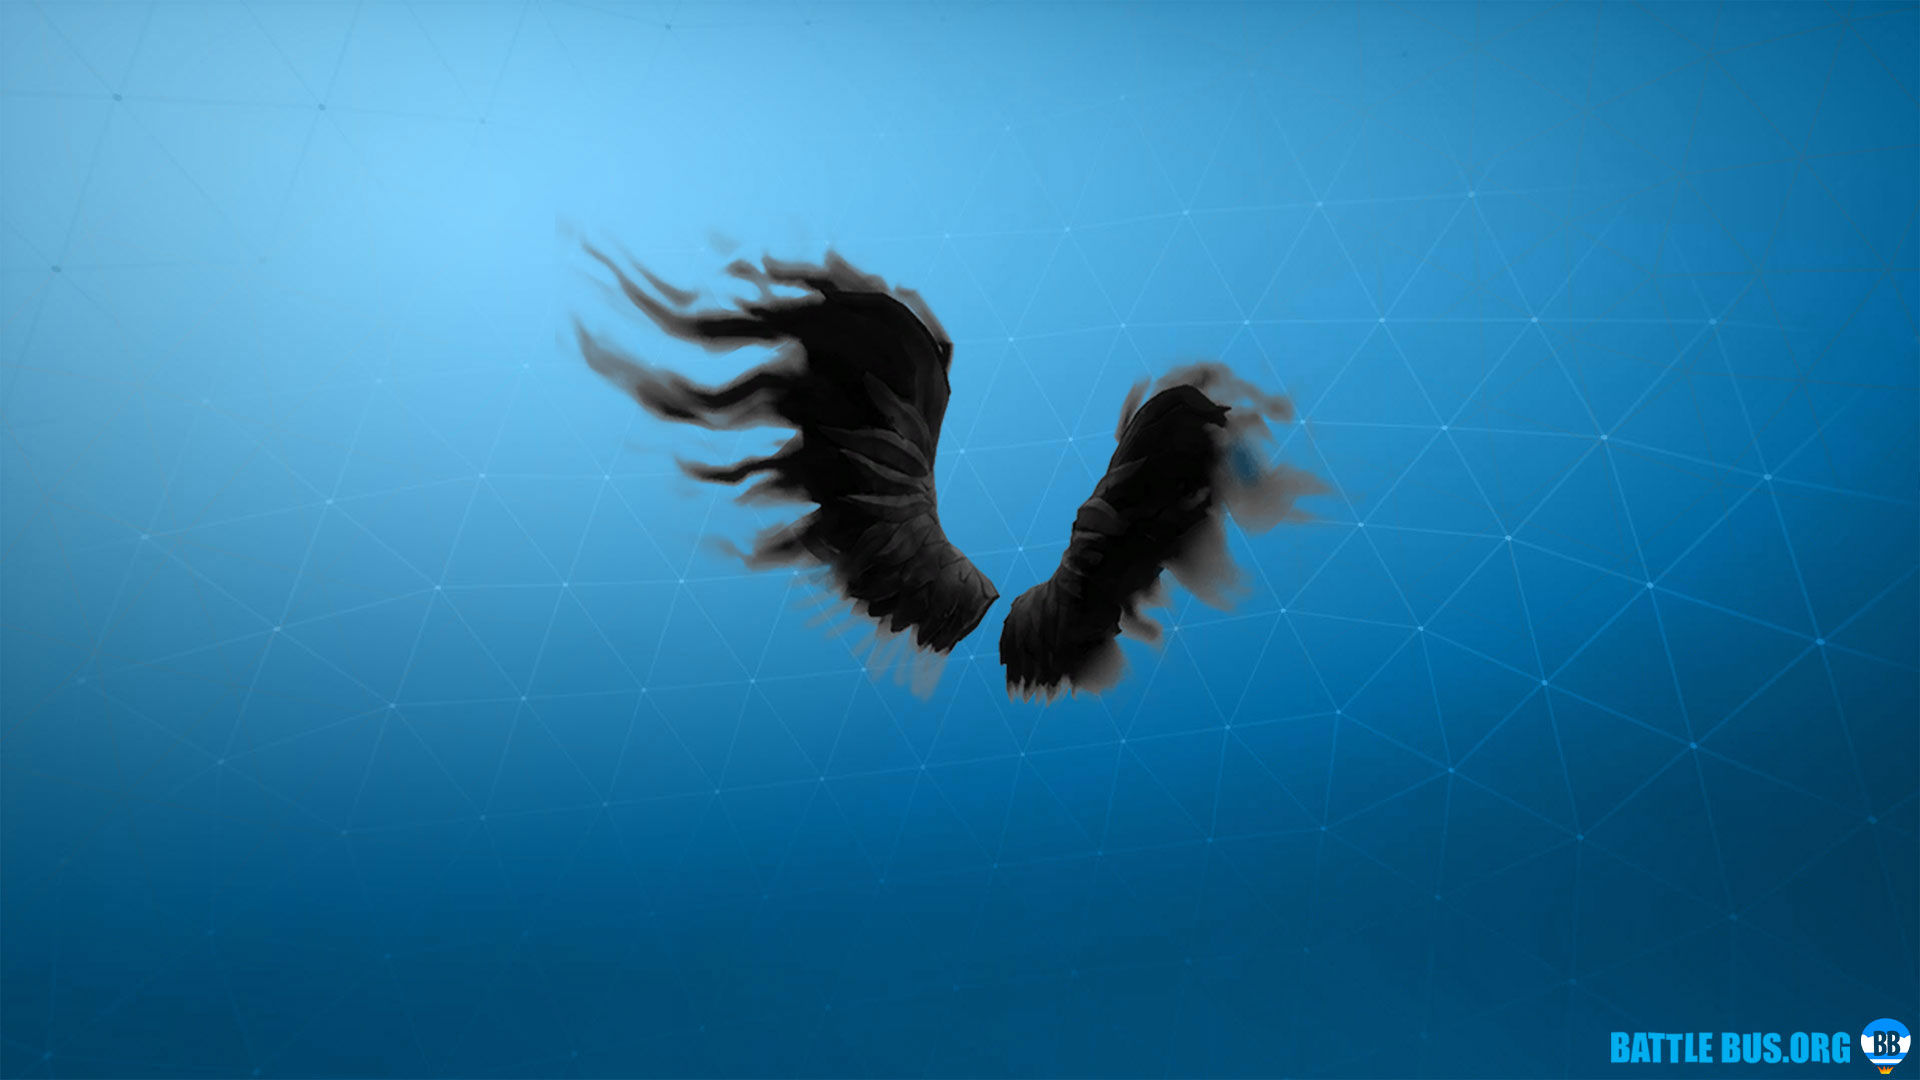 Cloaked Shadow Back Bling Wings Fortnite News Skins